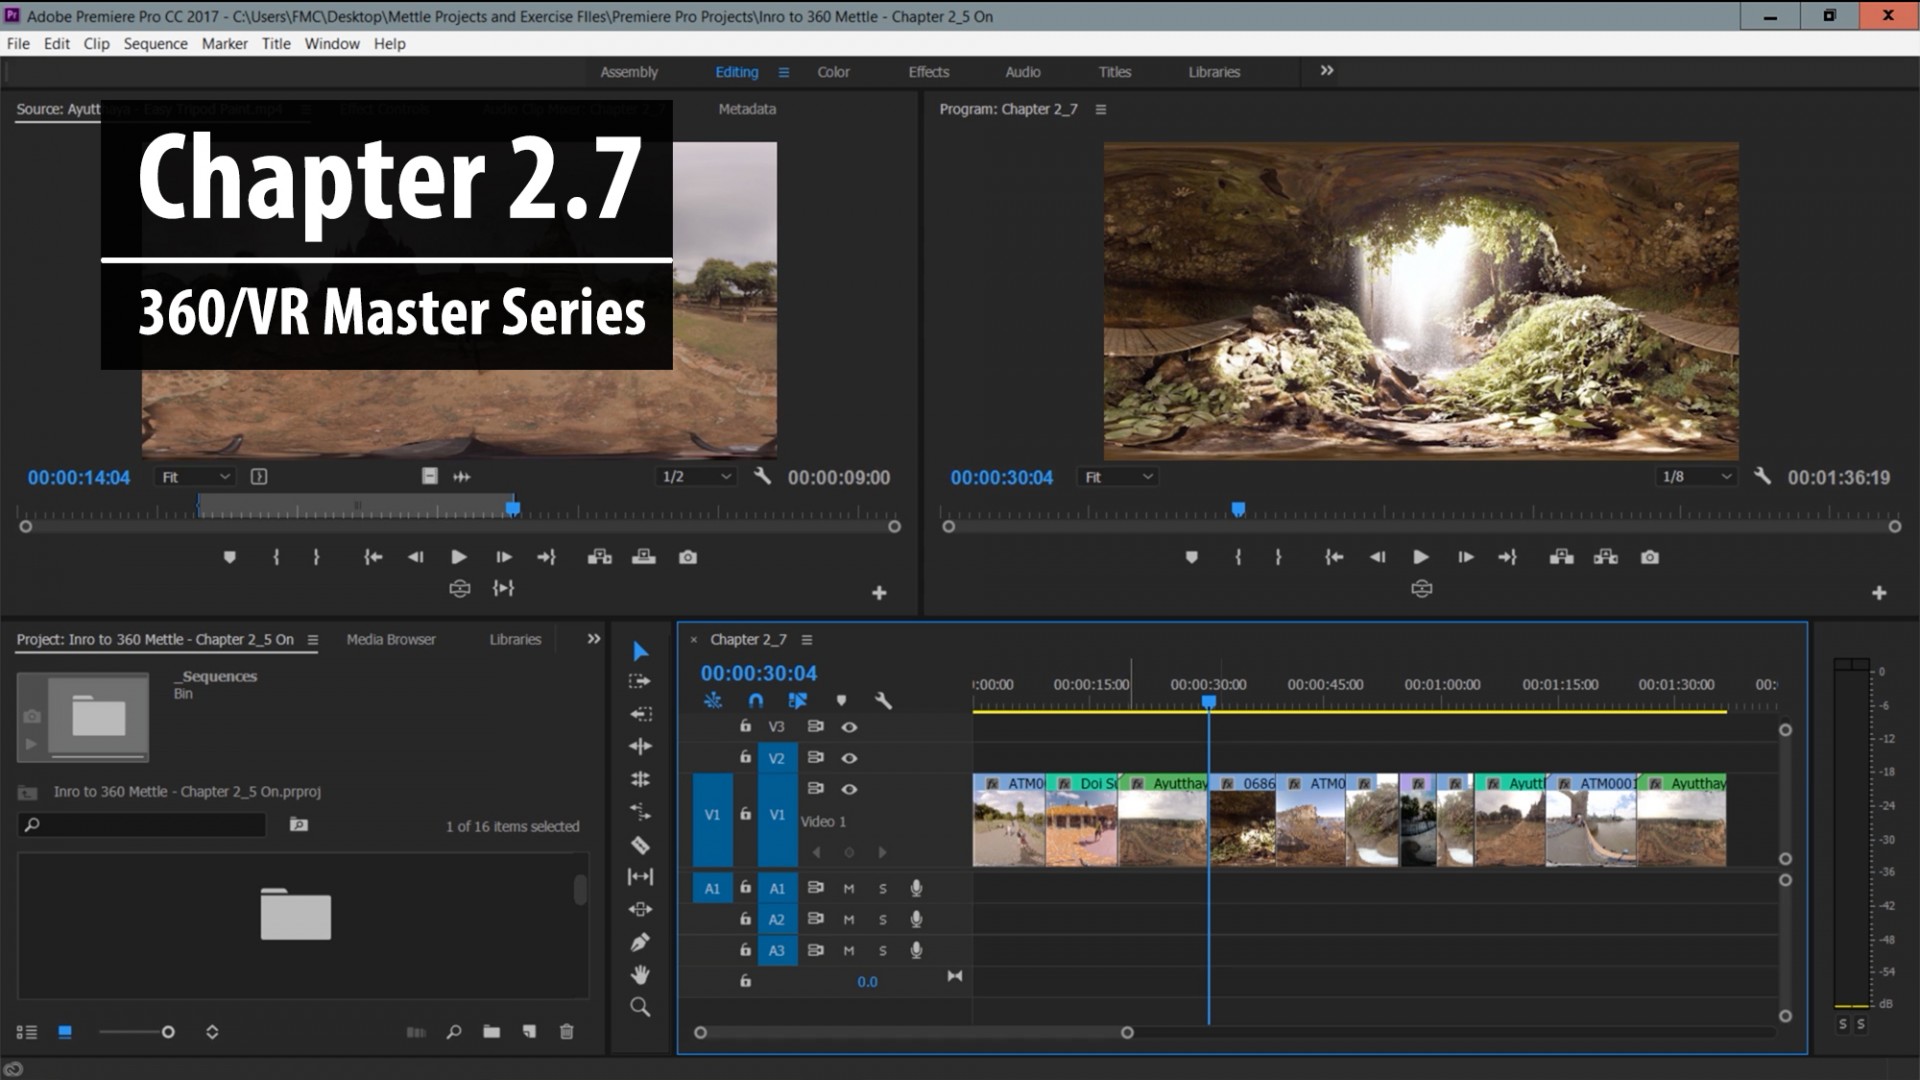 Chapter 2.7: Trimming Basics in Premiere Pro – Part 1 | 360/VR Master Series